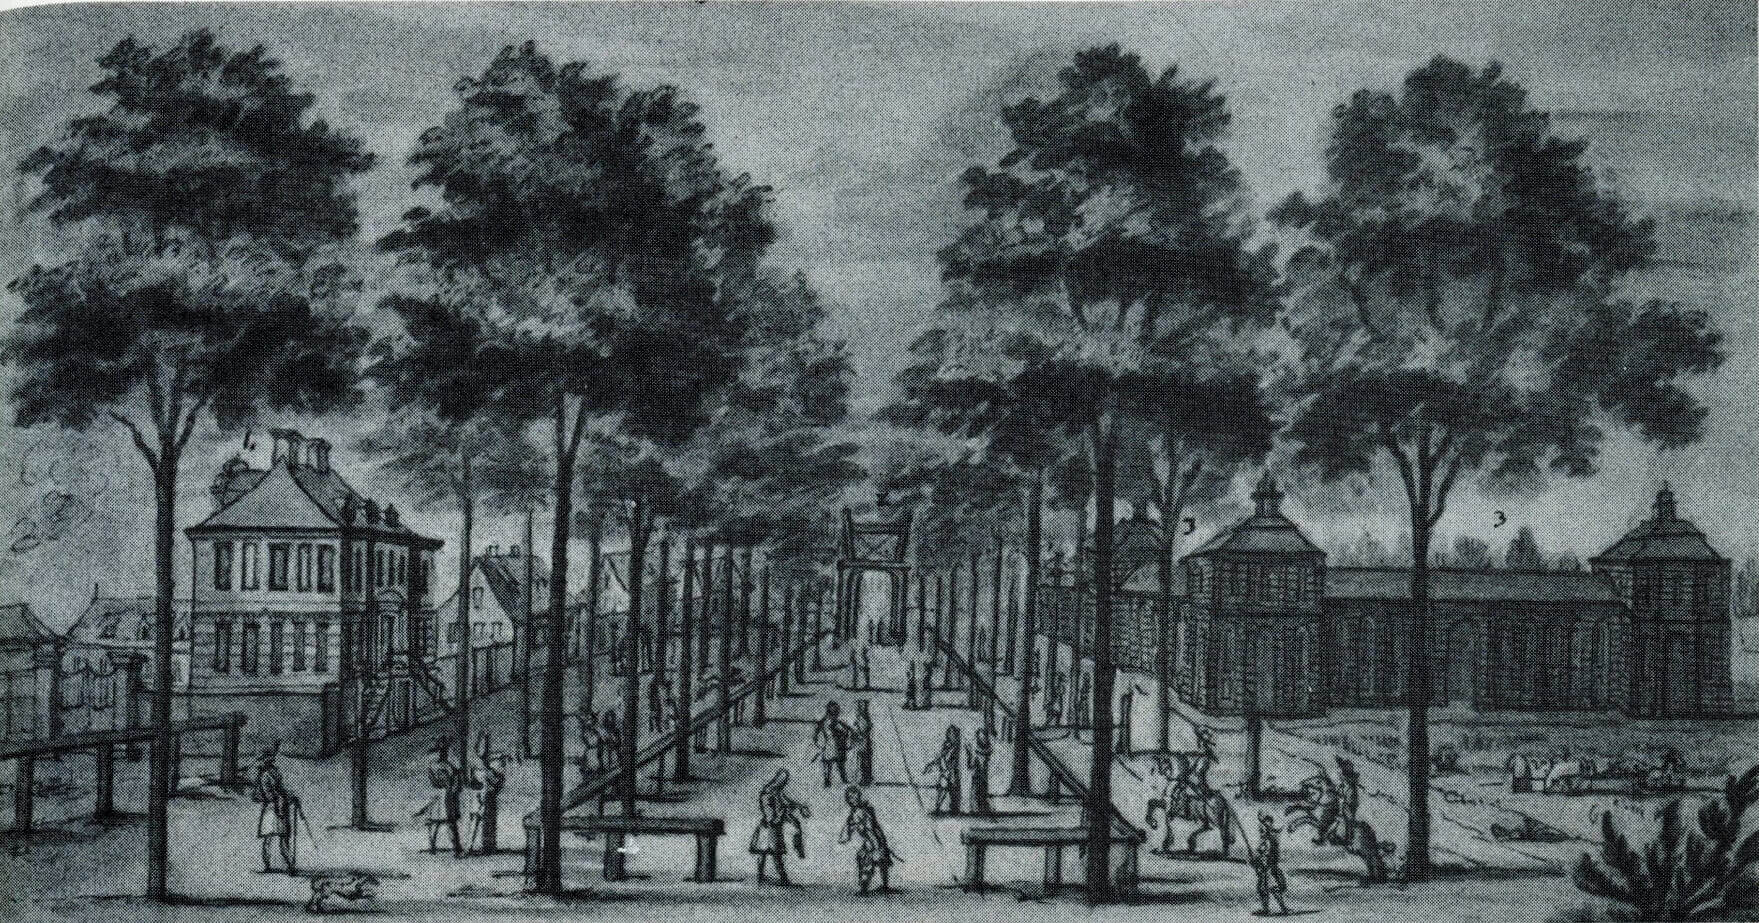 Unter den Linden at Berlin in a View © Johann Stridbeck en Henry W. Lawrence, City Trees. A Historical Geography from the Renaissance through the Nineteenth Century (2008), 33